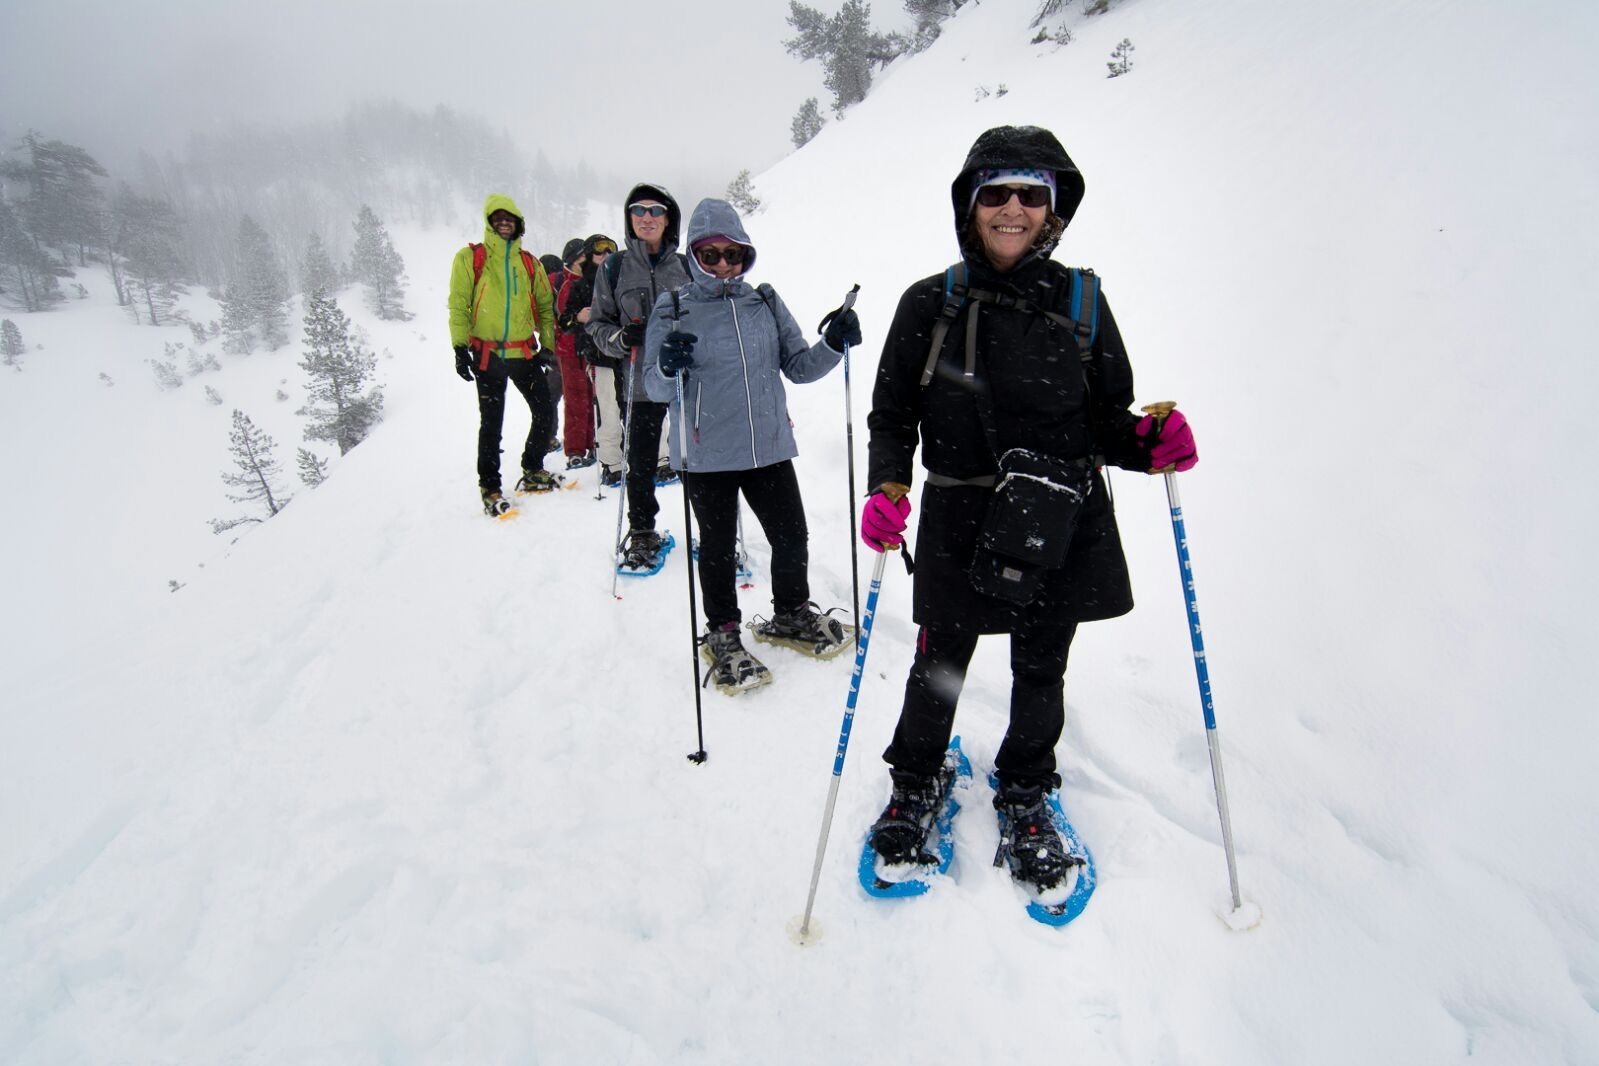 Wearing dark glasses, black snow gear, hot pink gloves and bright blue snowshoes, Begonia stands at the front of a group of snowshoers walking a trail on the side of a snowy mountain.